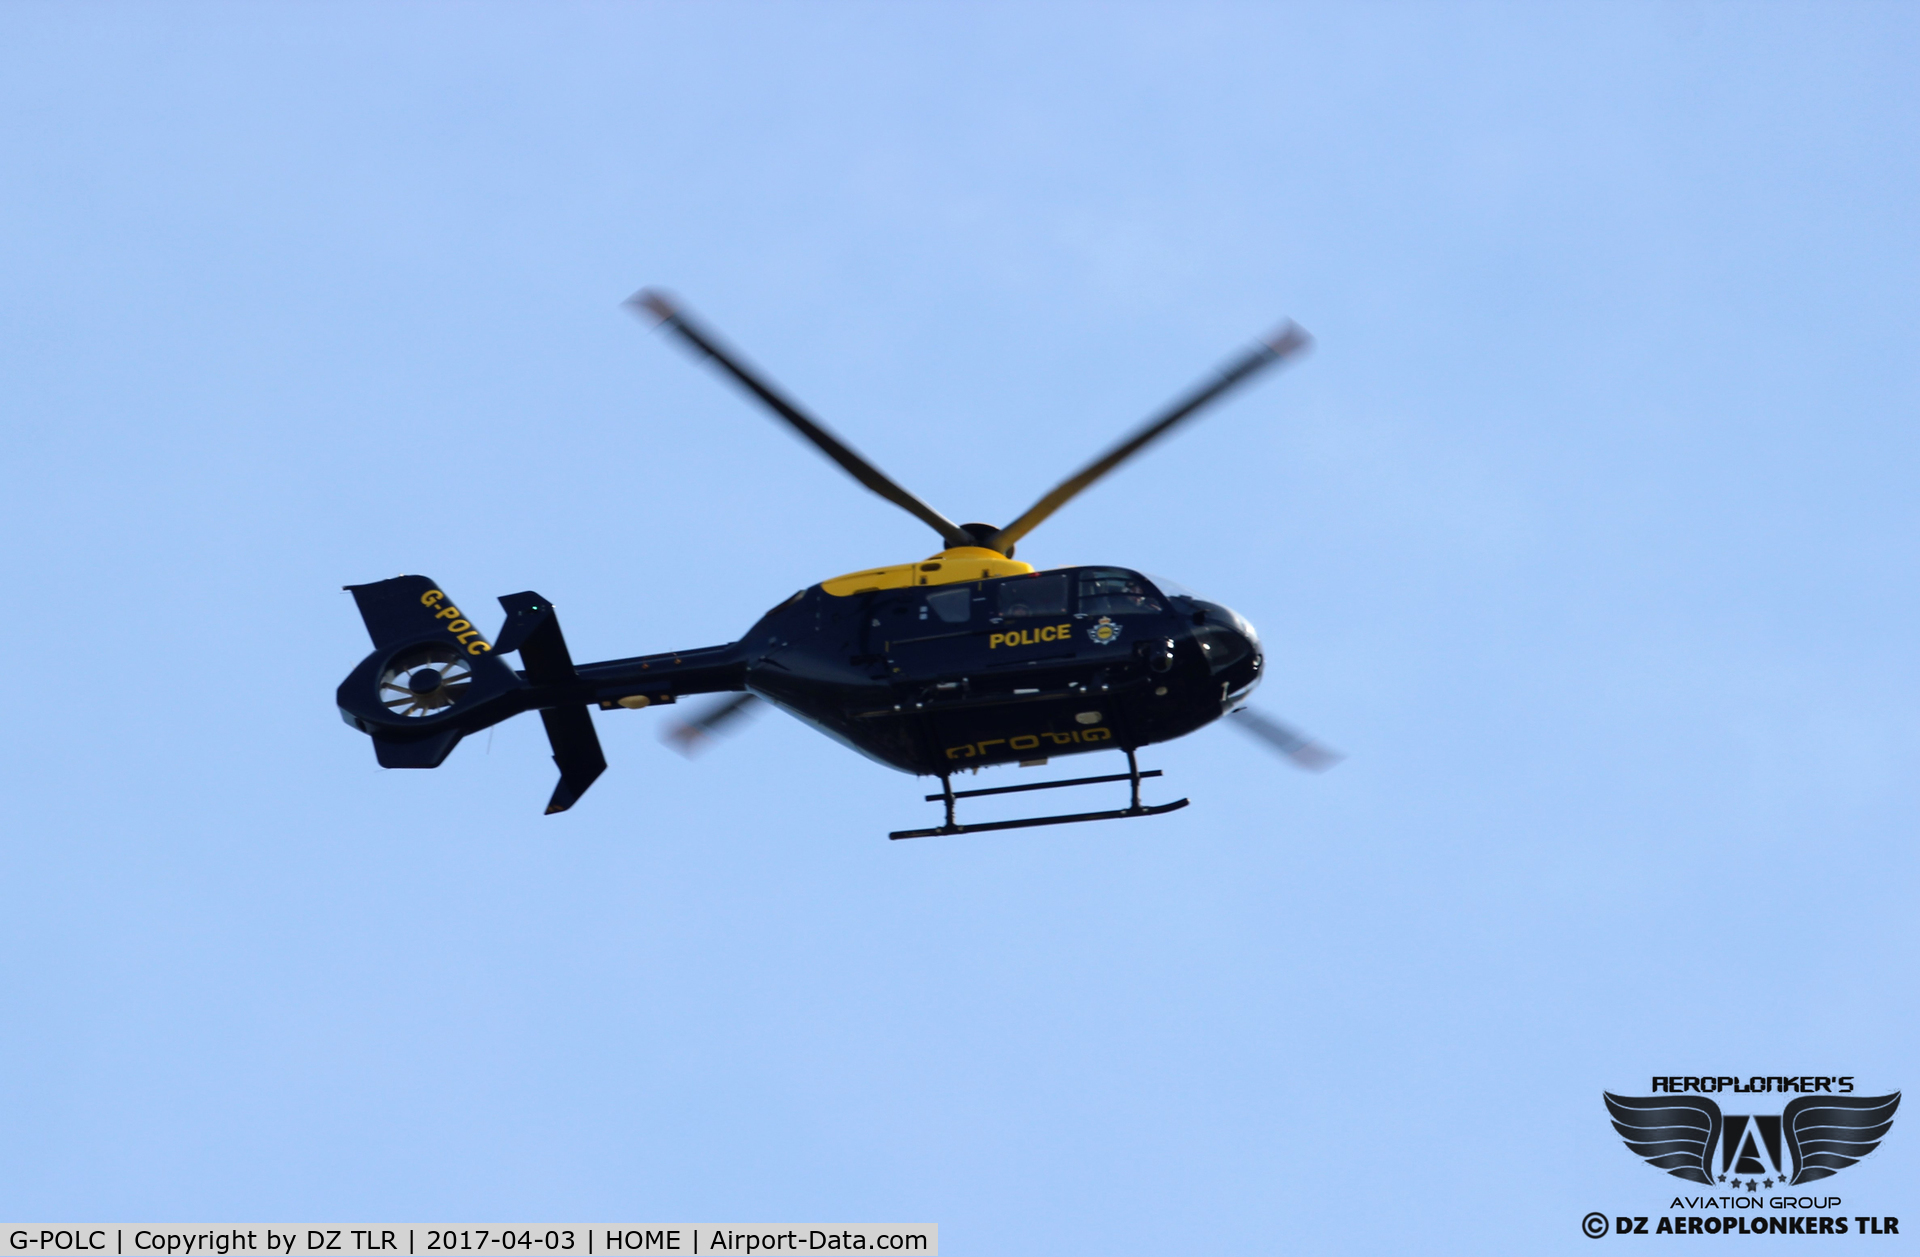 G-POLC, 2001 Eurocopter EC-135T-2+ C/N 0209, GMP National Police Air Service
CONSTRUCTOR Eurocopter
TYPE EC135
SERIES T2+
BASE BARTON GREATER MANCHESTER
C/NO 0209